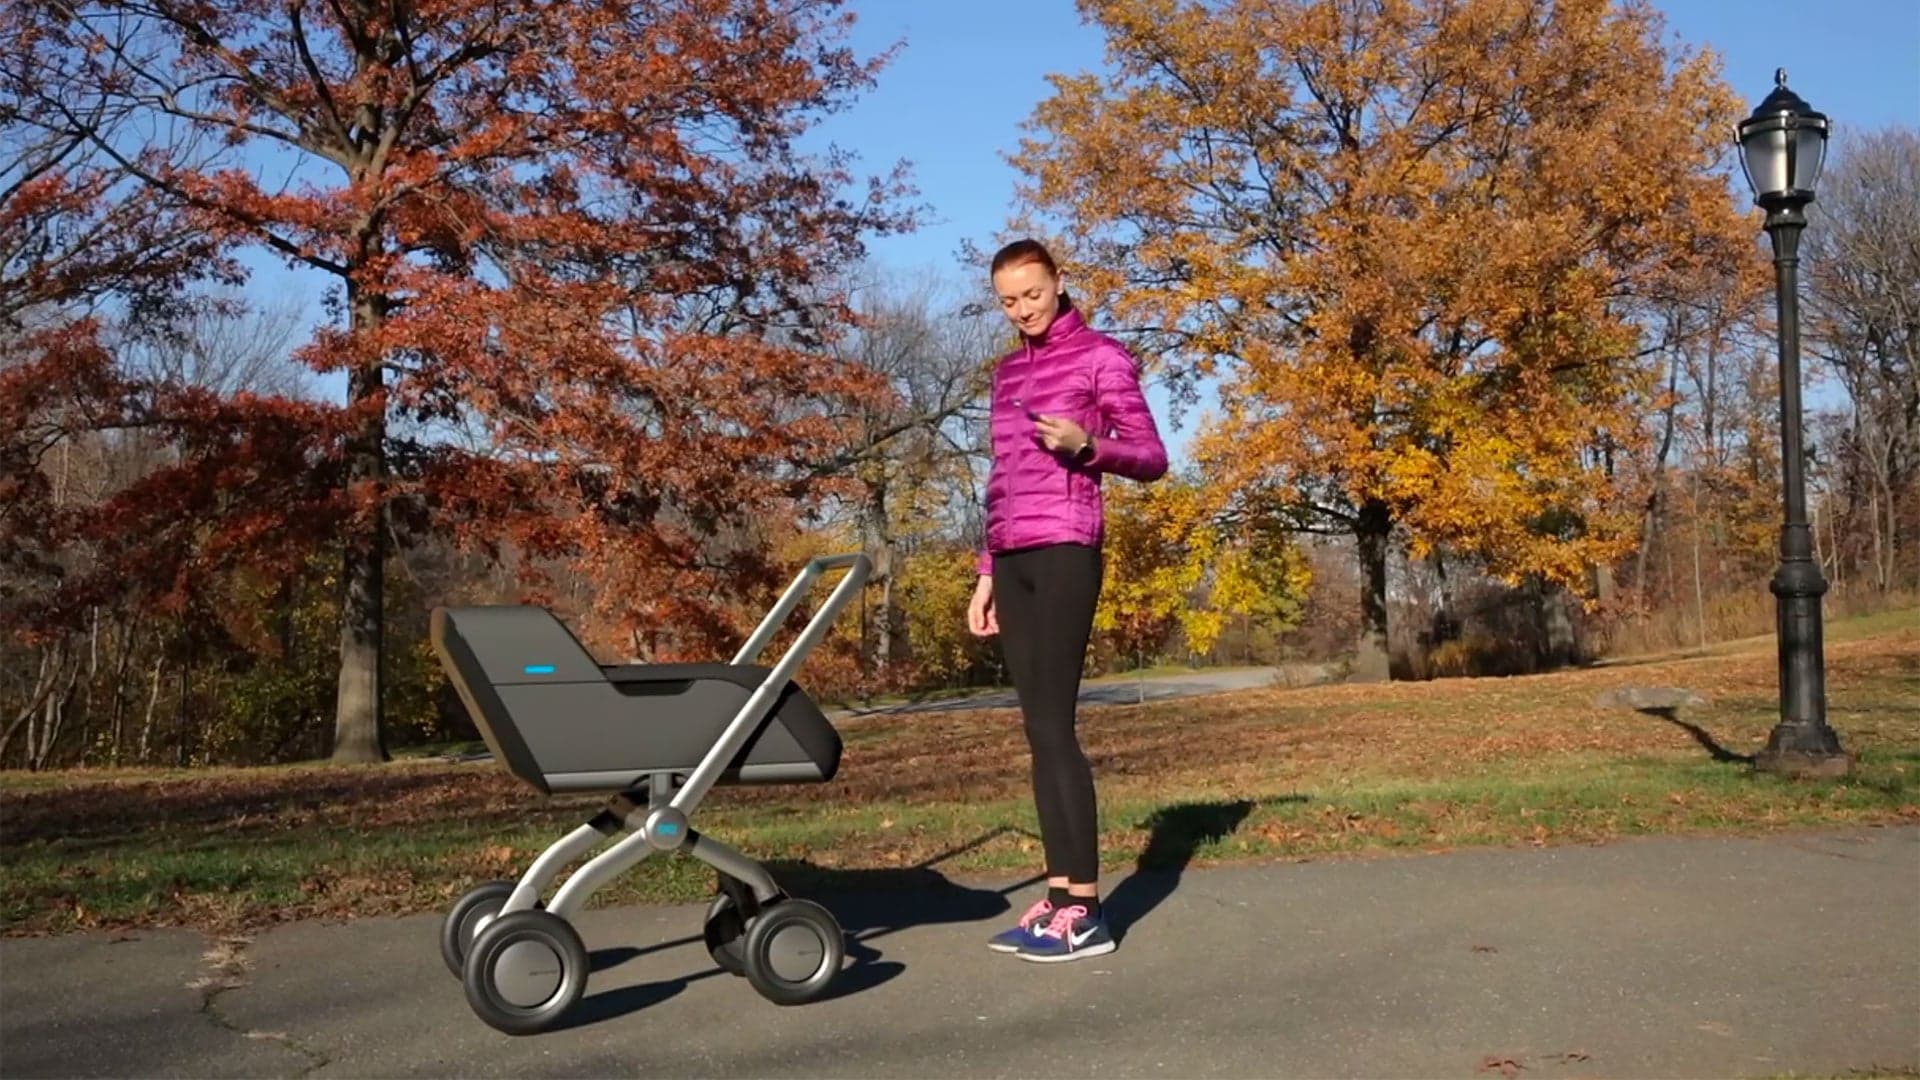 Behold, The Self-Driving Baby Stroller